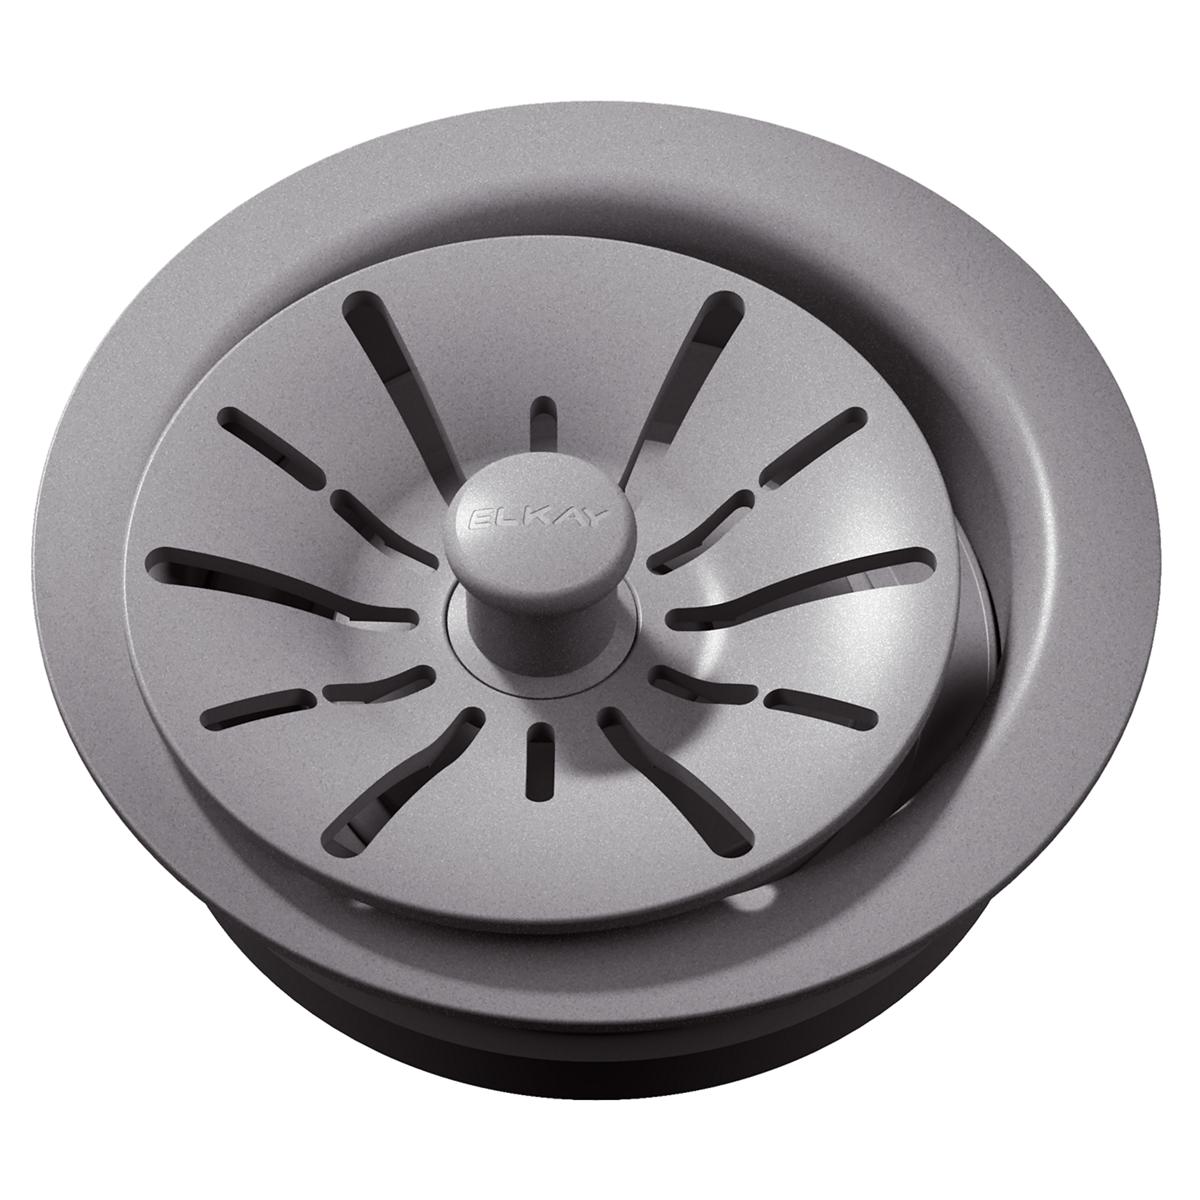 Elkay Quartz Perfect Drain 3-1/2" Polymer Disposer Flange with Removable Basket Strainer and Rubber Stopper